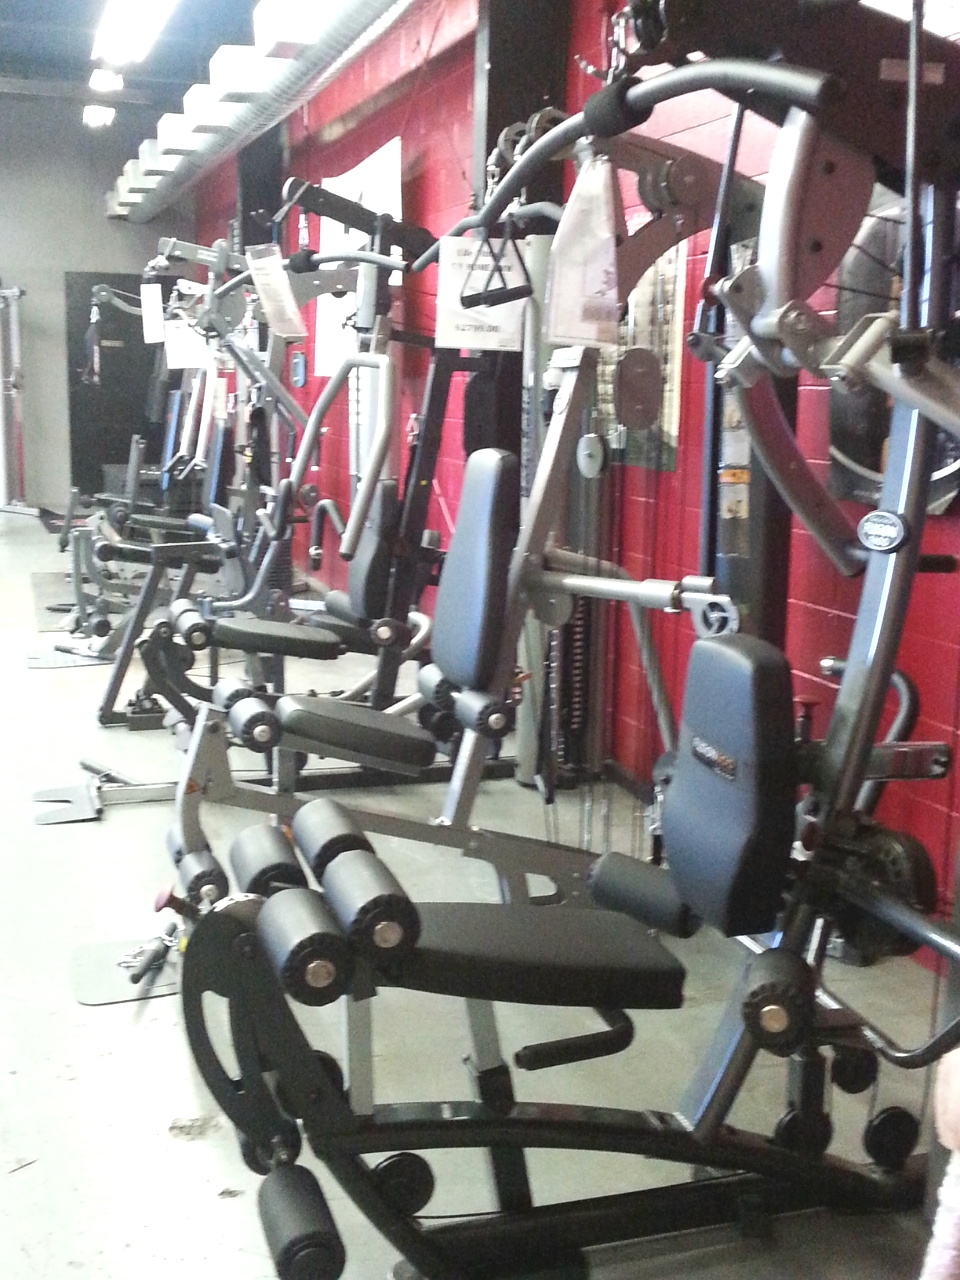 Finer Fitness | store | 2780 Howard Ave, Windsor, ON N8X 3X9, Canada | 5199669603 OR +1 519-966-9603